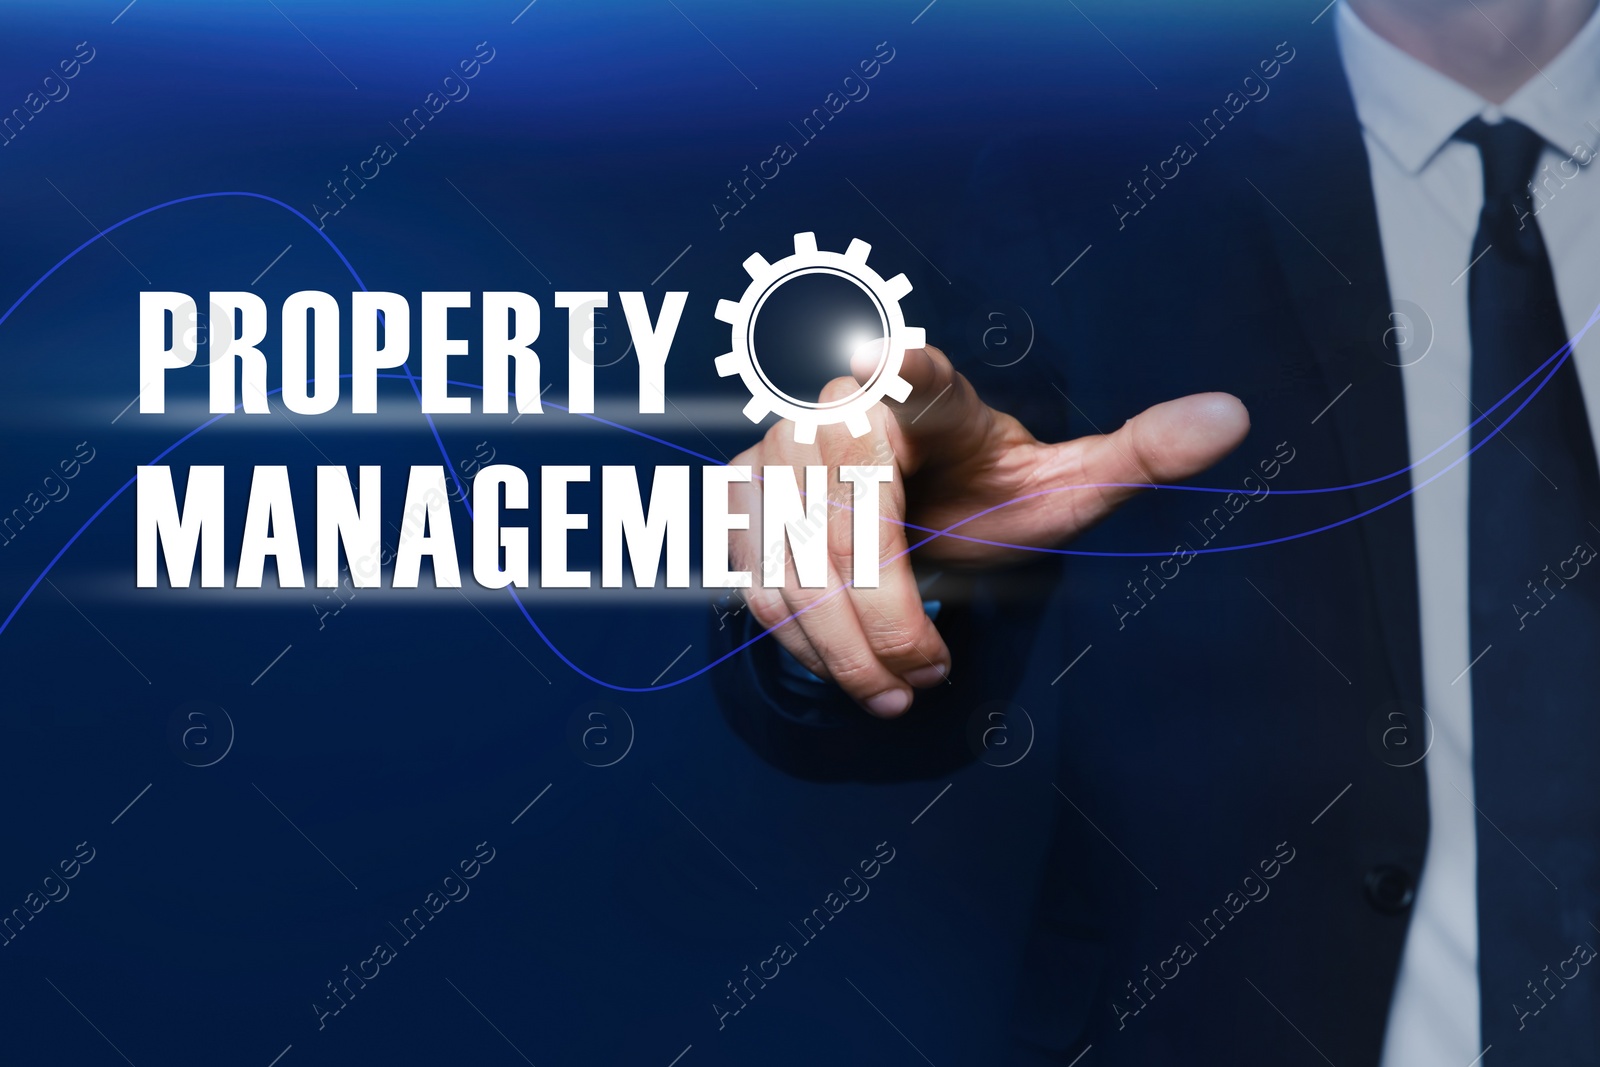 Image of Property management concept. Man using virtual screen with gear icon, closeup